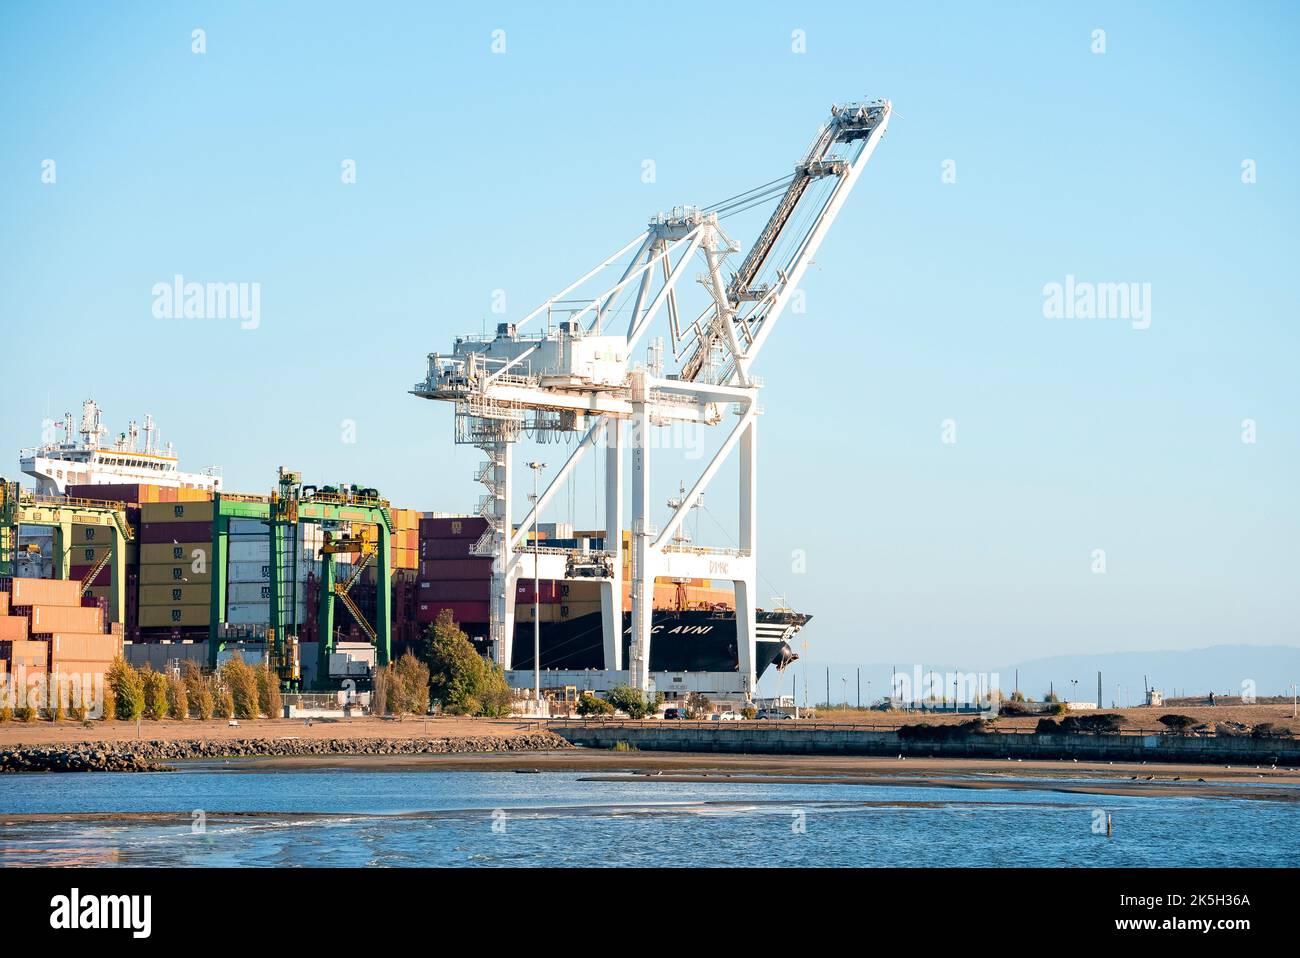 Cranes loading cargo containers on ship at Port of Oakland by bay on sunny day Stock Photo